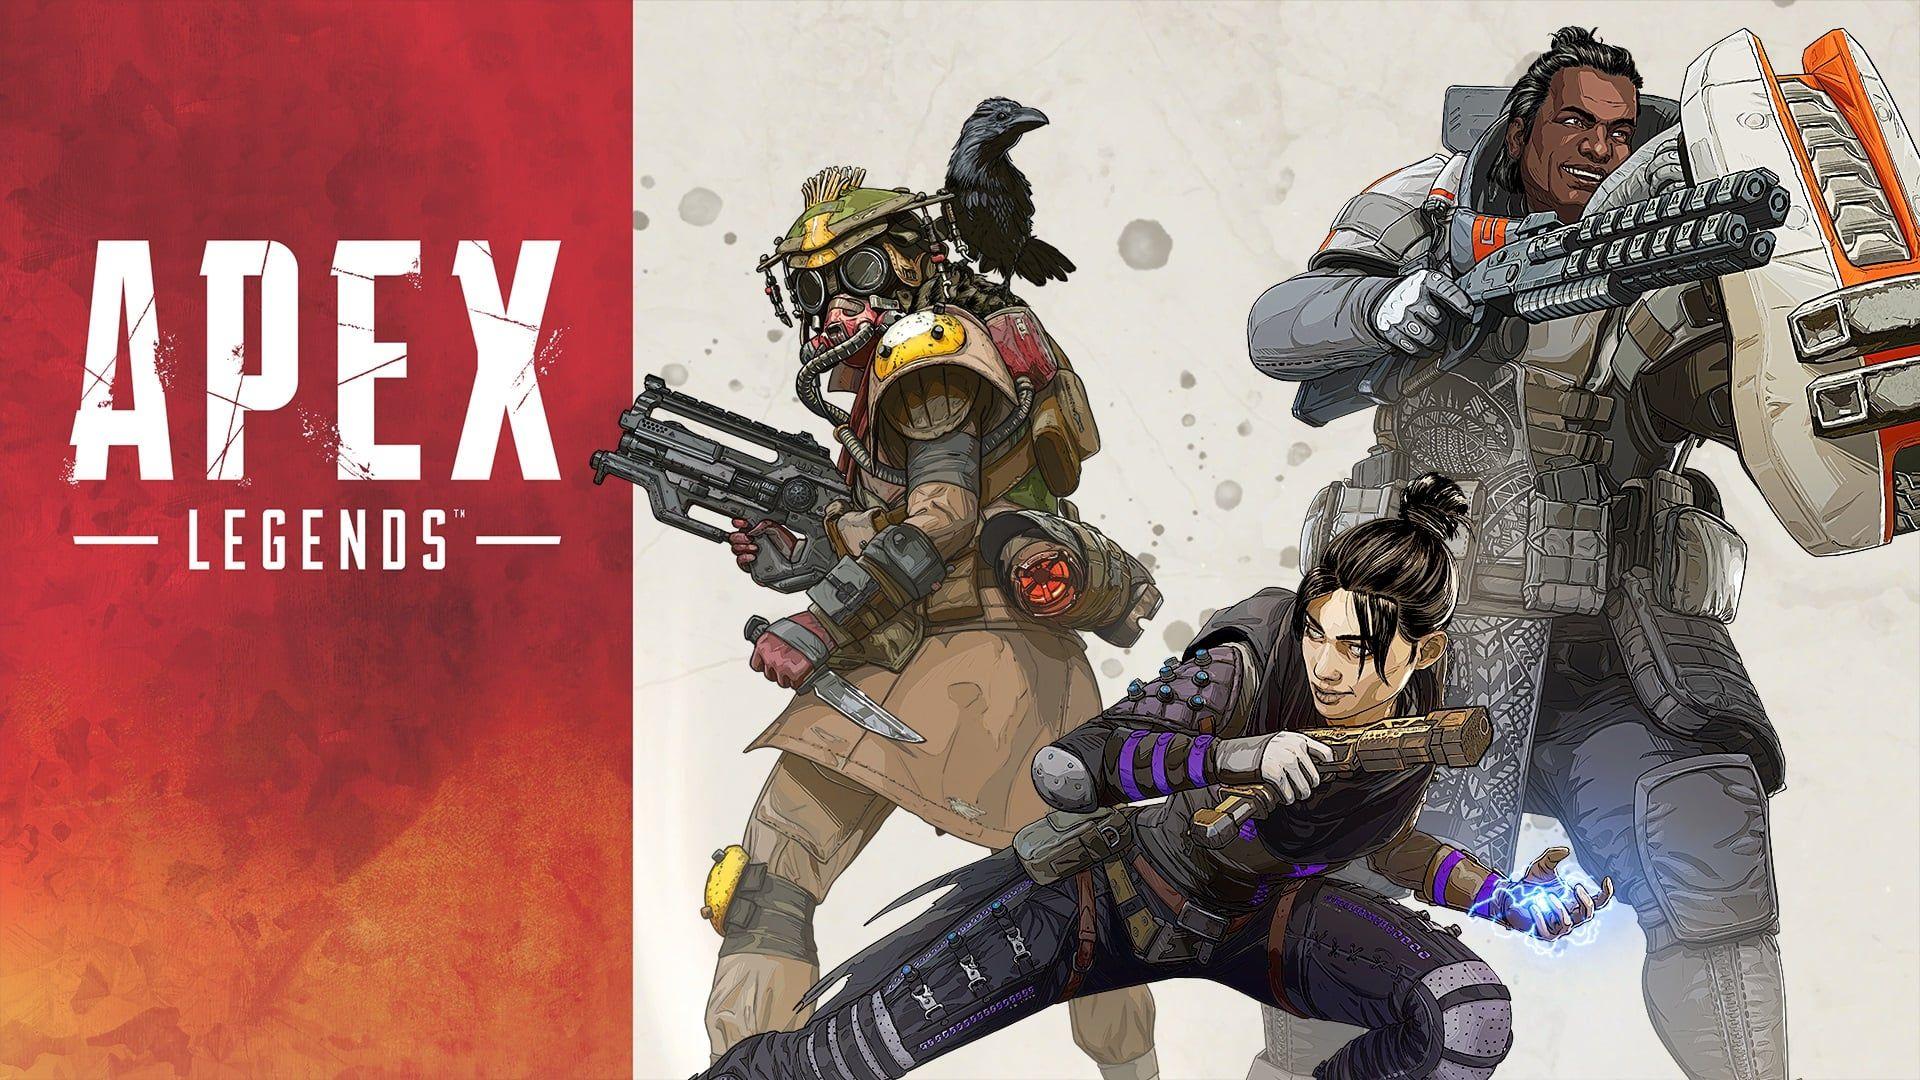 I Was Skeptical of Apex Legends, But Then It Won Me Over